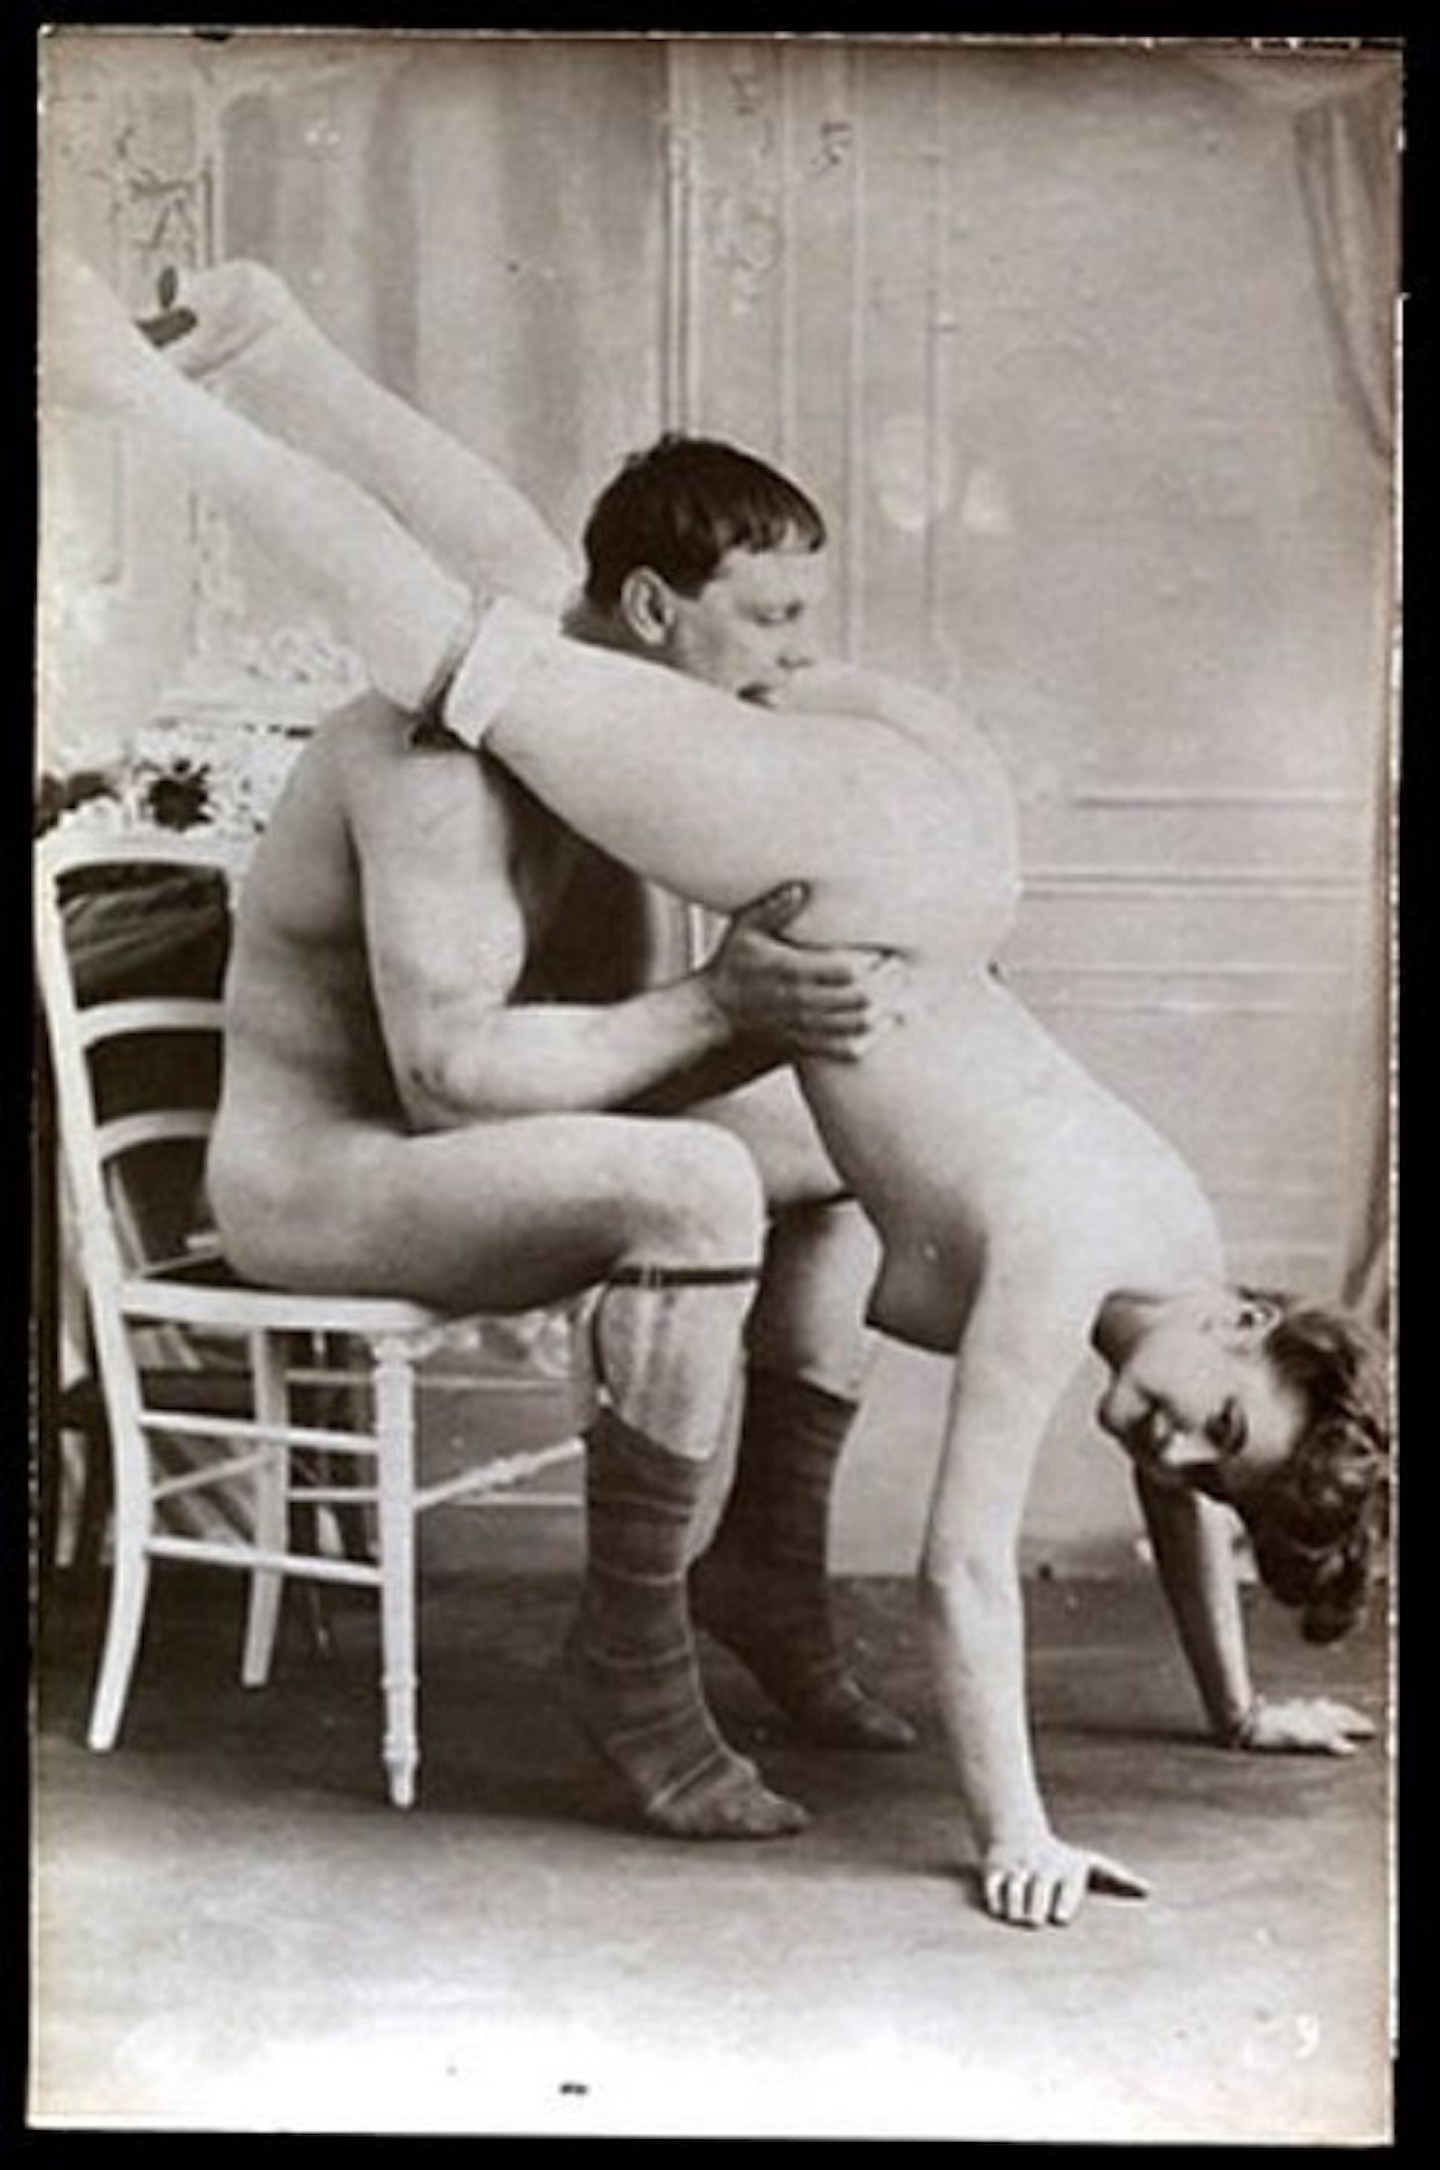 1800s Pornography - The Unbridled Joy of Victorian Porn